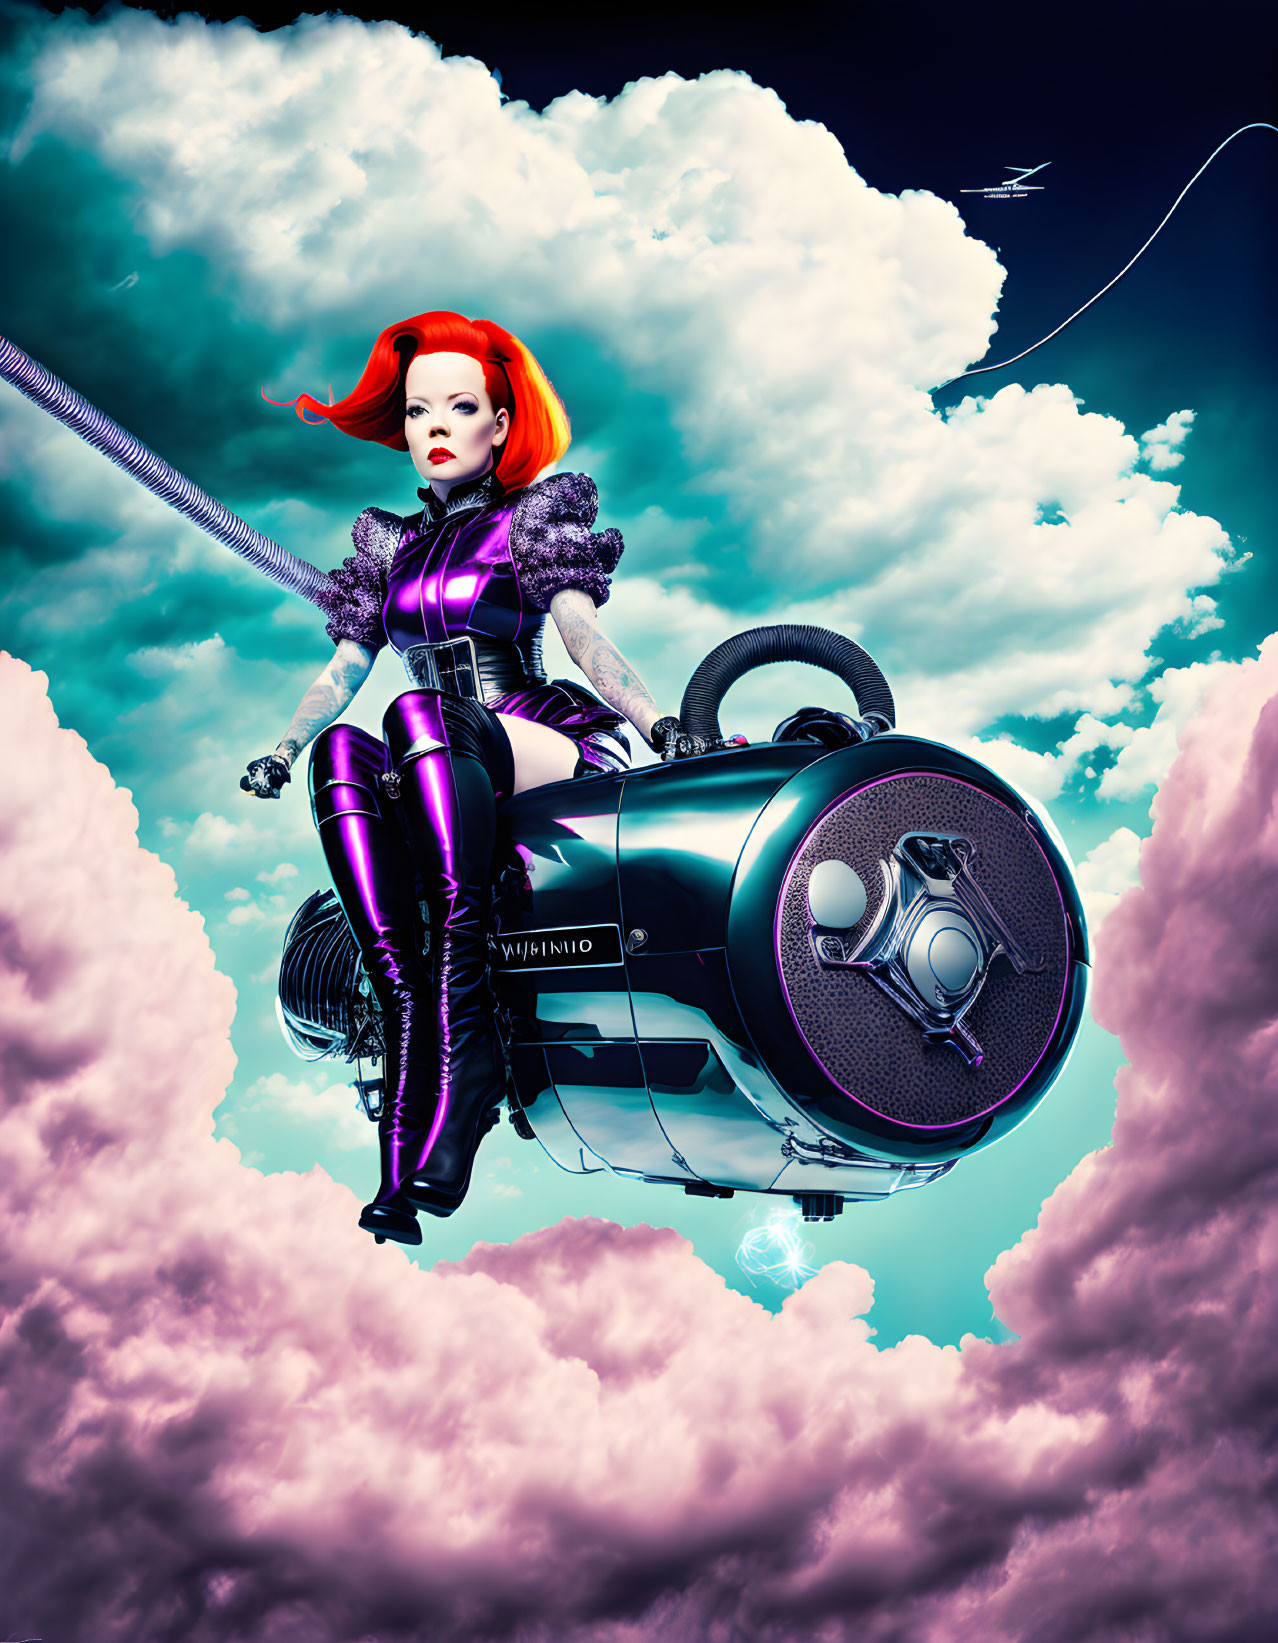 Red-haired female character on jet vacuum cleaner in cloudy sky with kite.